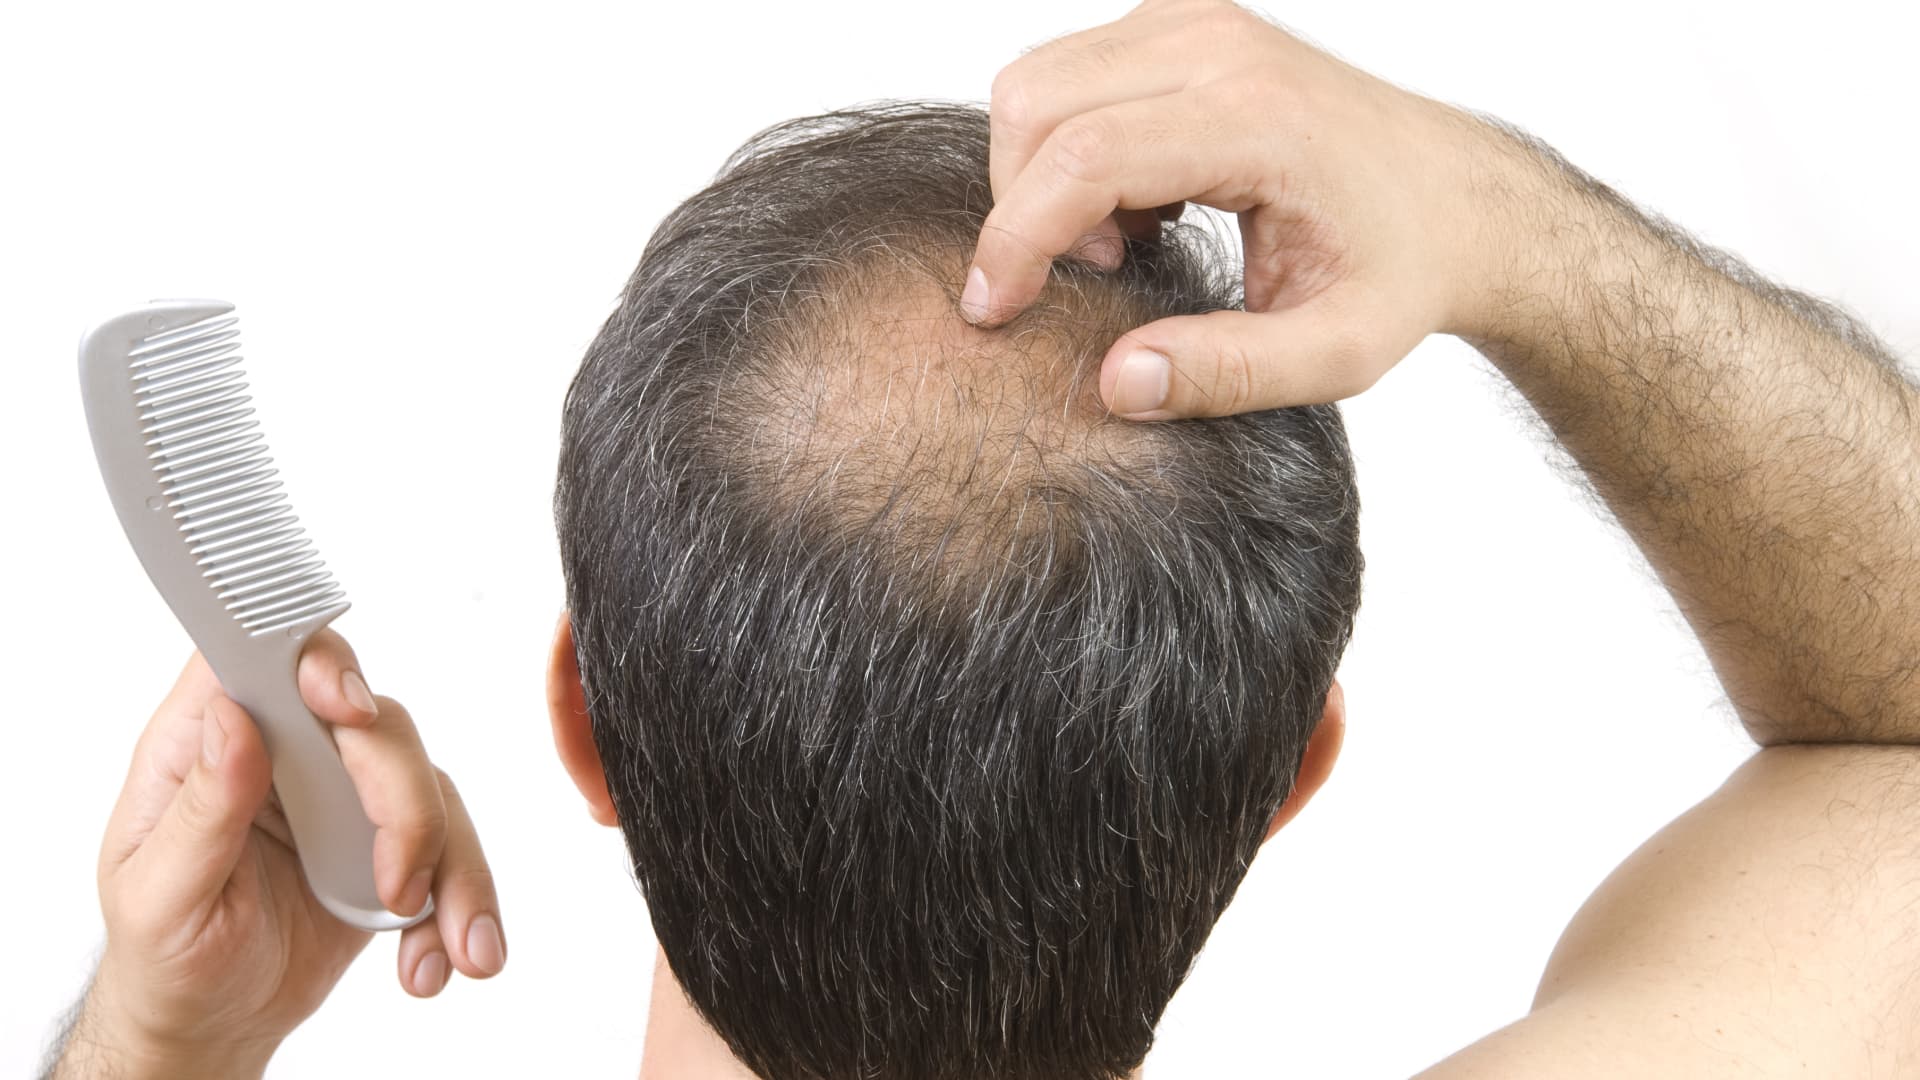 Baldness cure could be found in an osteoporosis drug, study finds